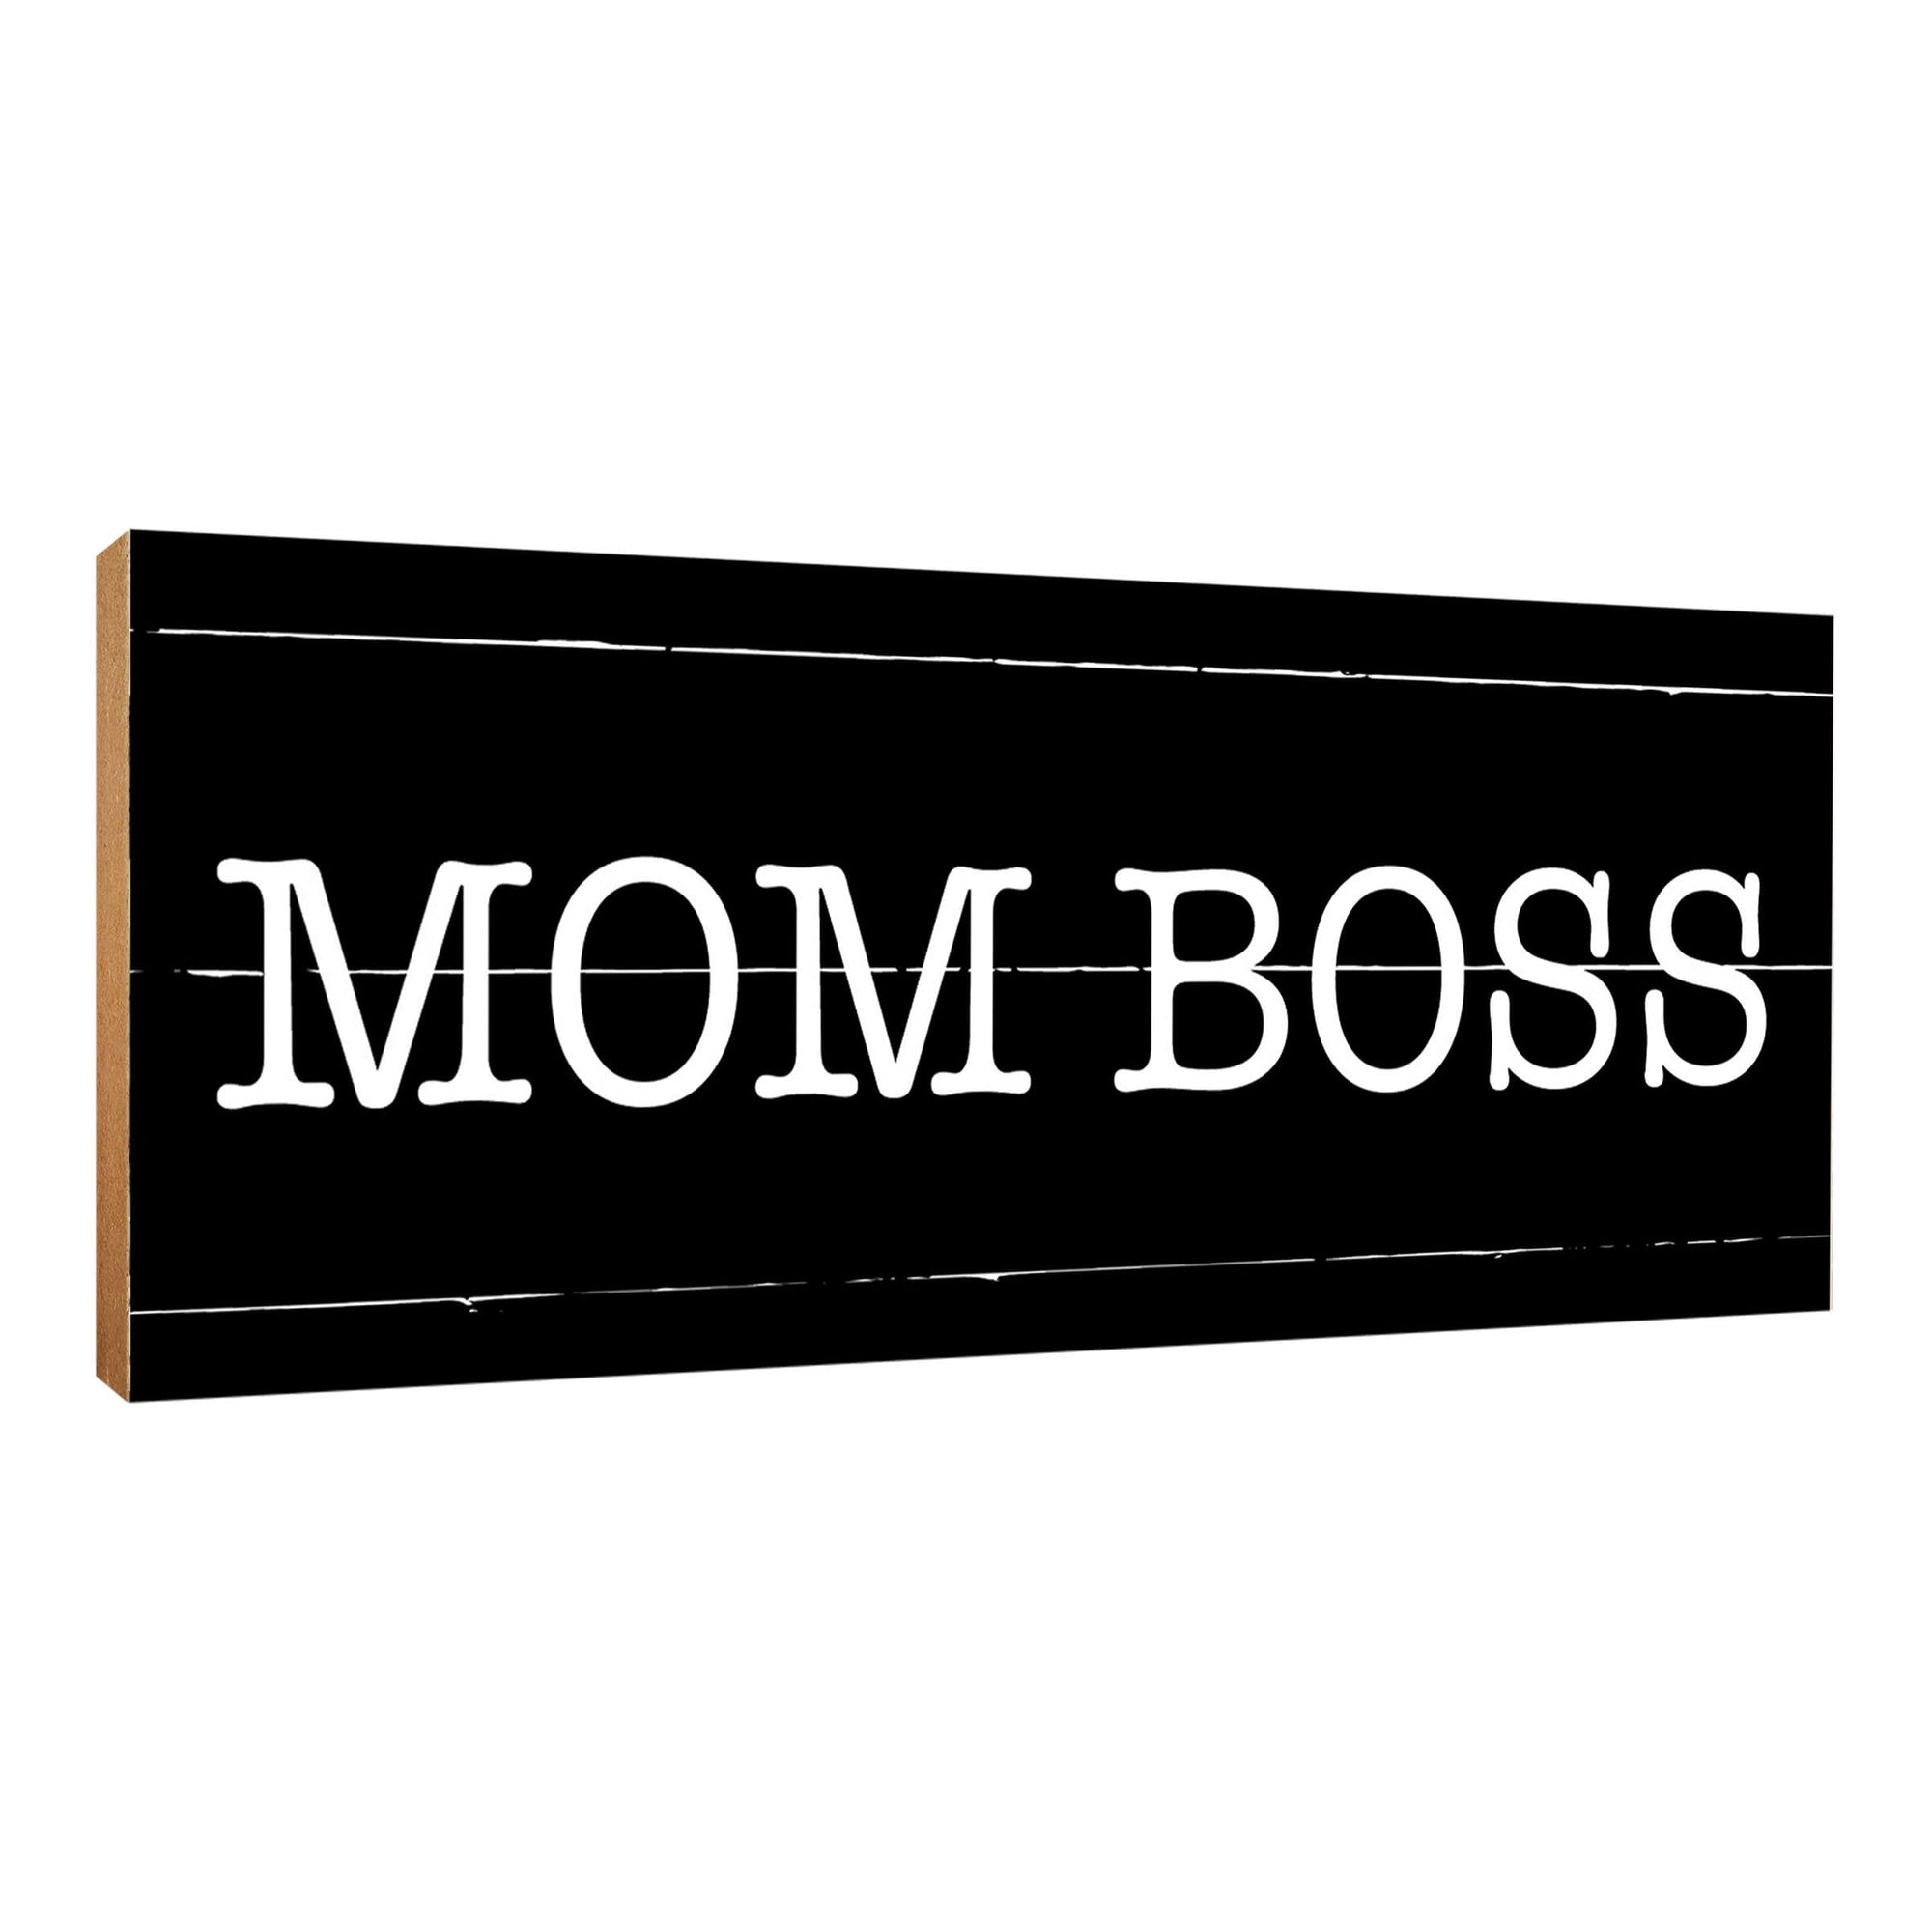 Wooden Sign Gift for Mother’s Day